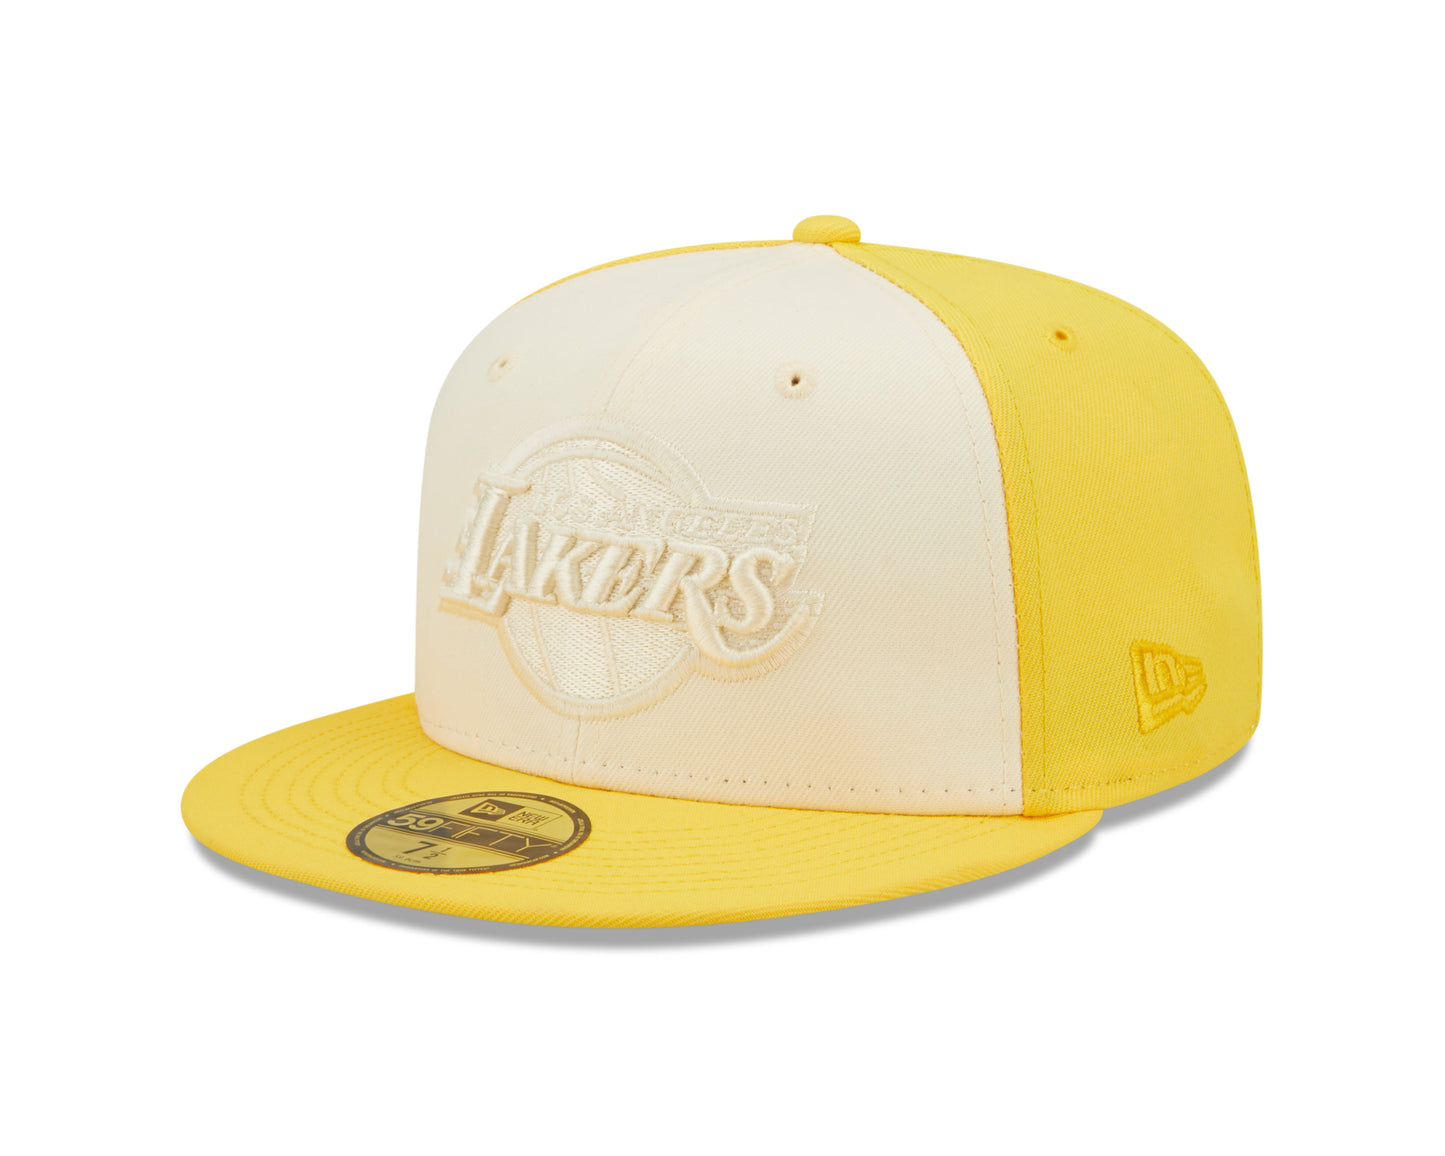 Los Angeles Lakers New Era Tonal 2 Tone Yellow/ Cream 59fifty Fitted Hat